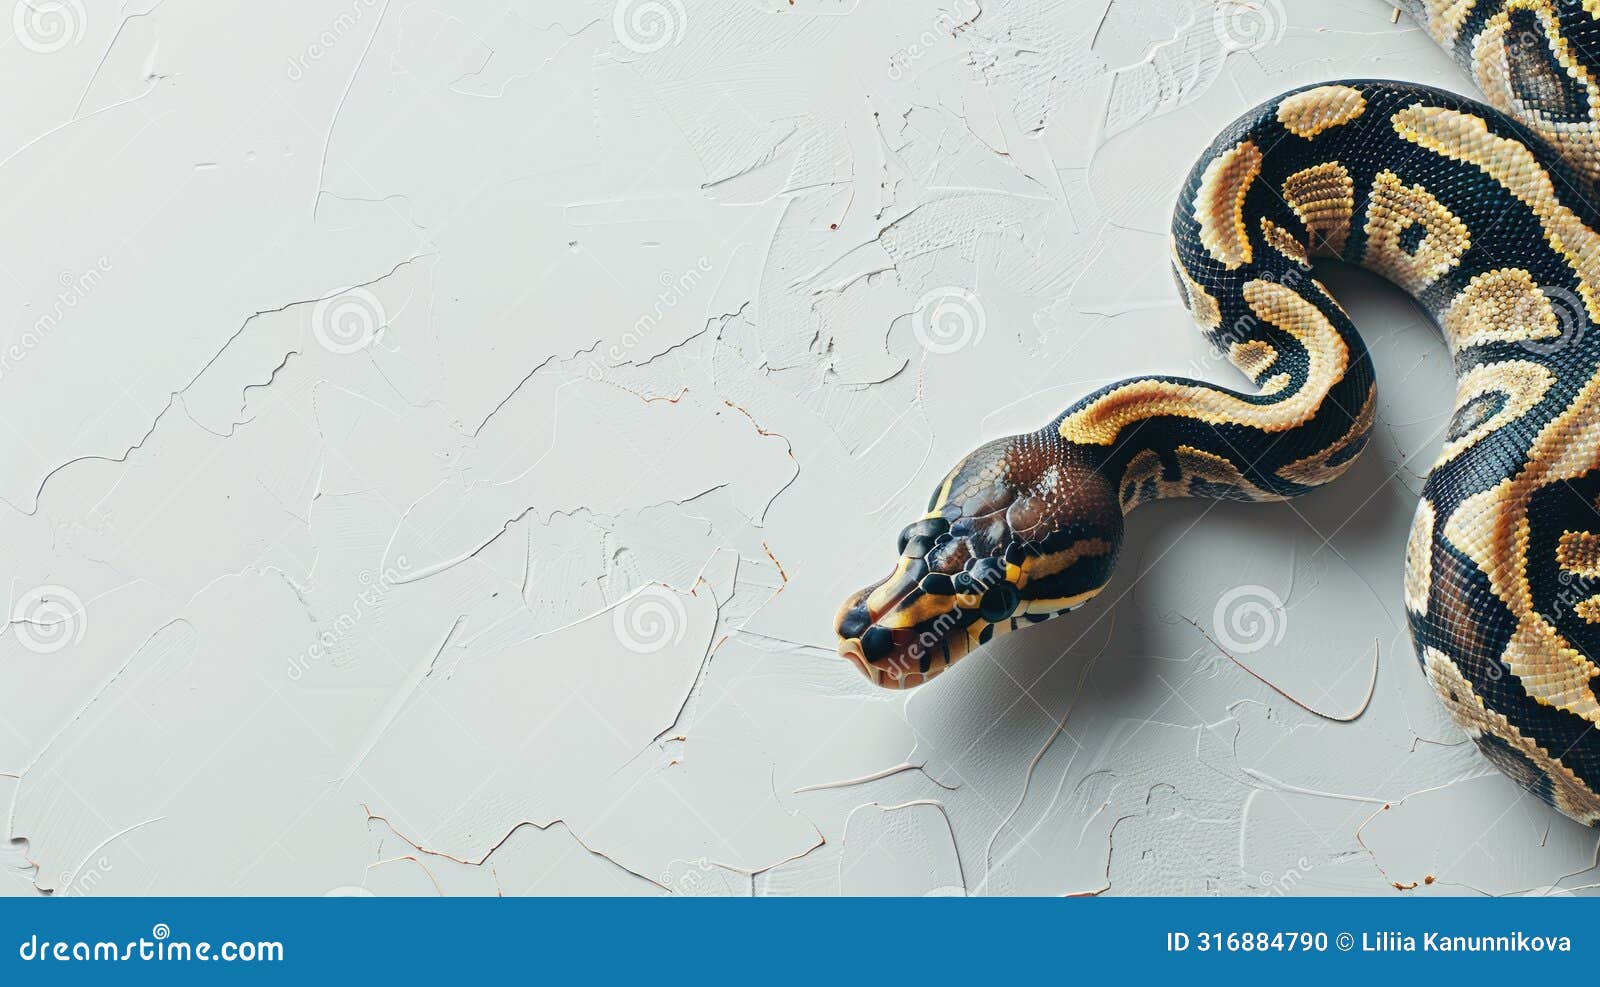 a ball python against a pristine white background, showcasing its striking patterns and unique coloration in a